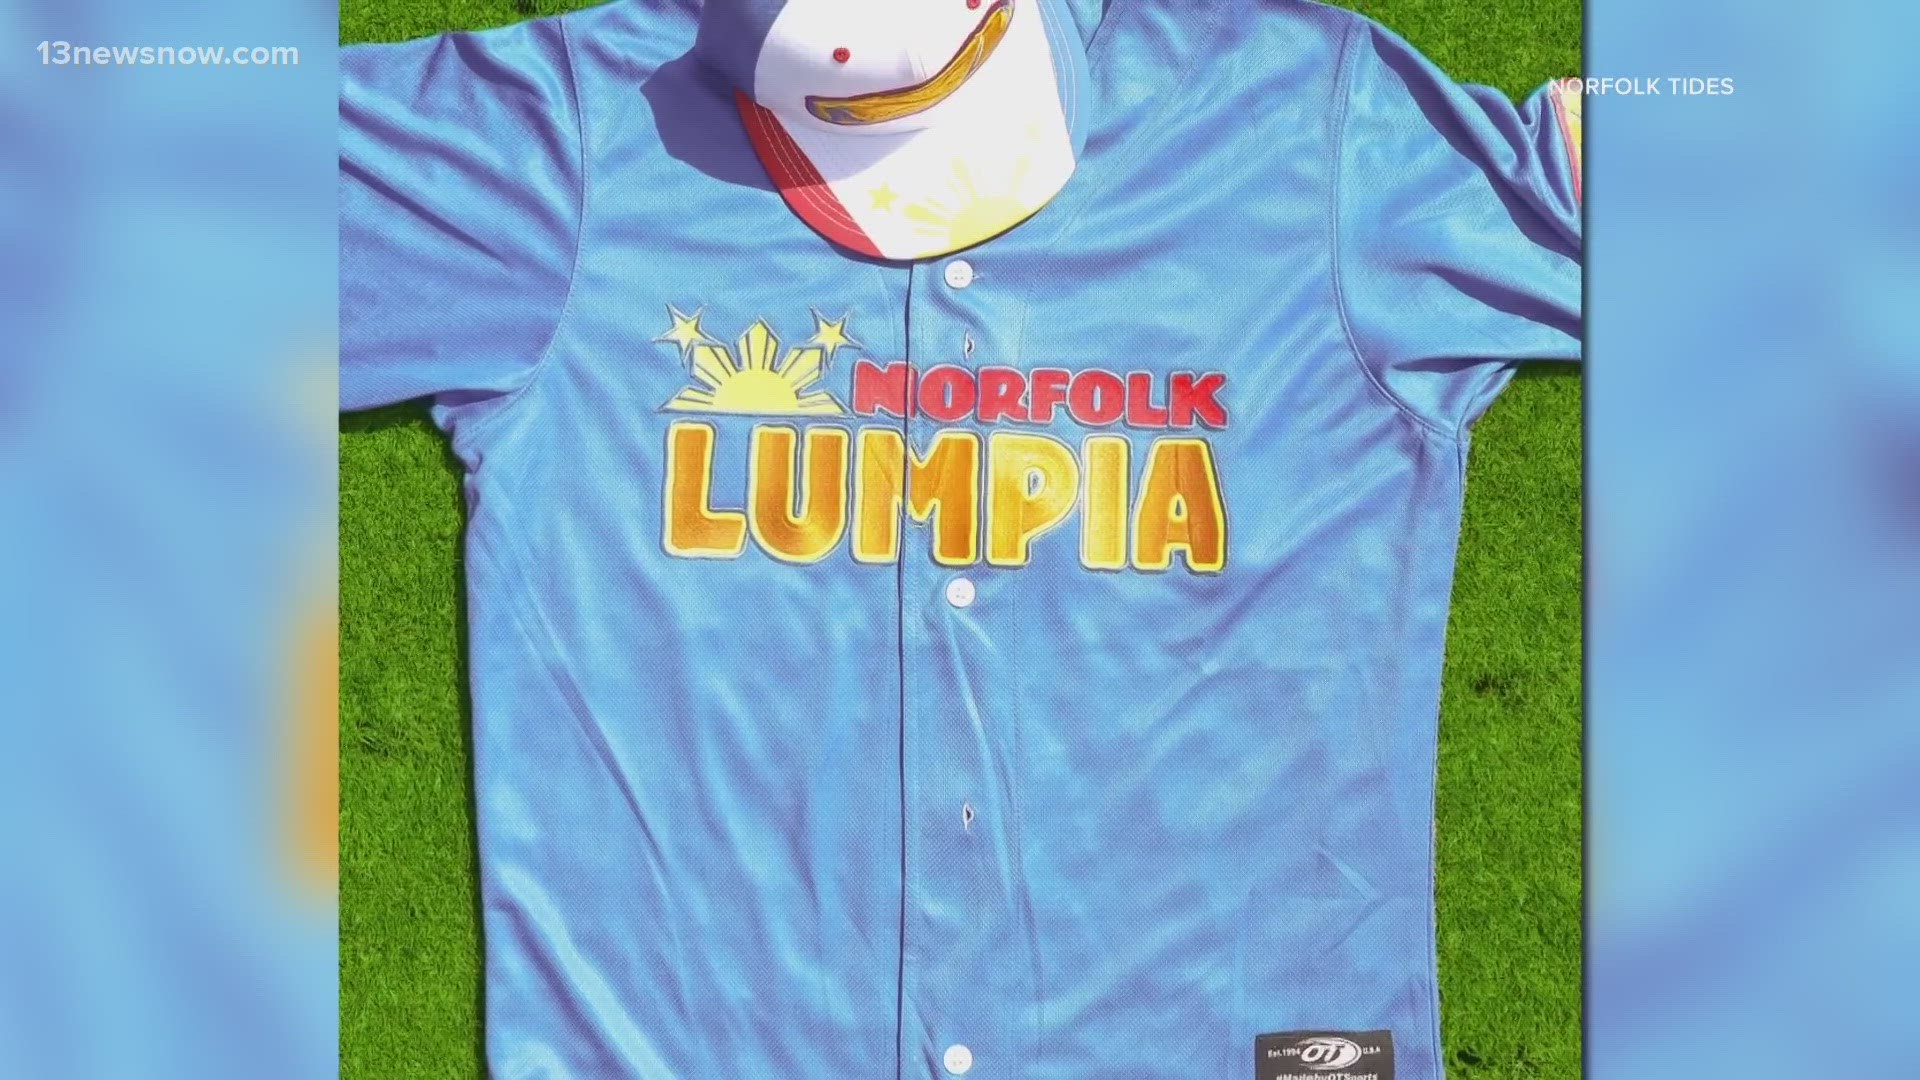 The Norfolk Tides played as Norfolk Lumpia during the Saturday game against the Gwinnett Stripers.